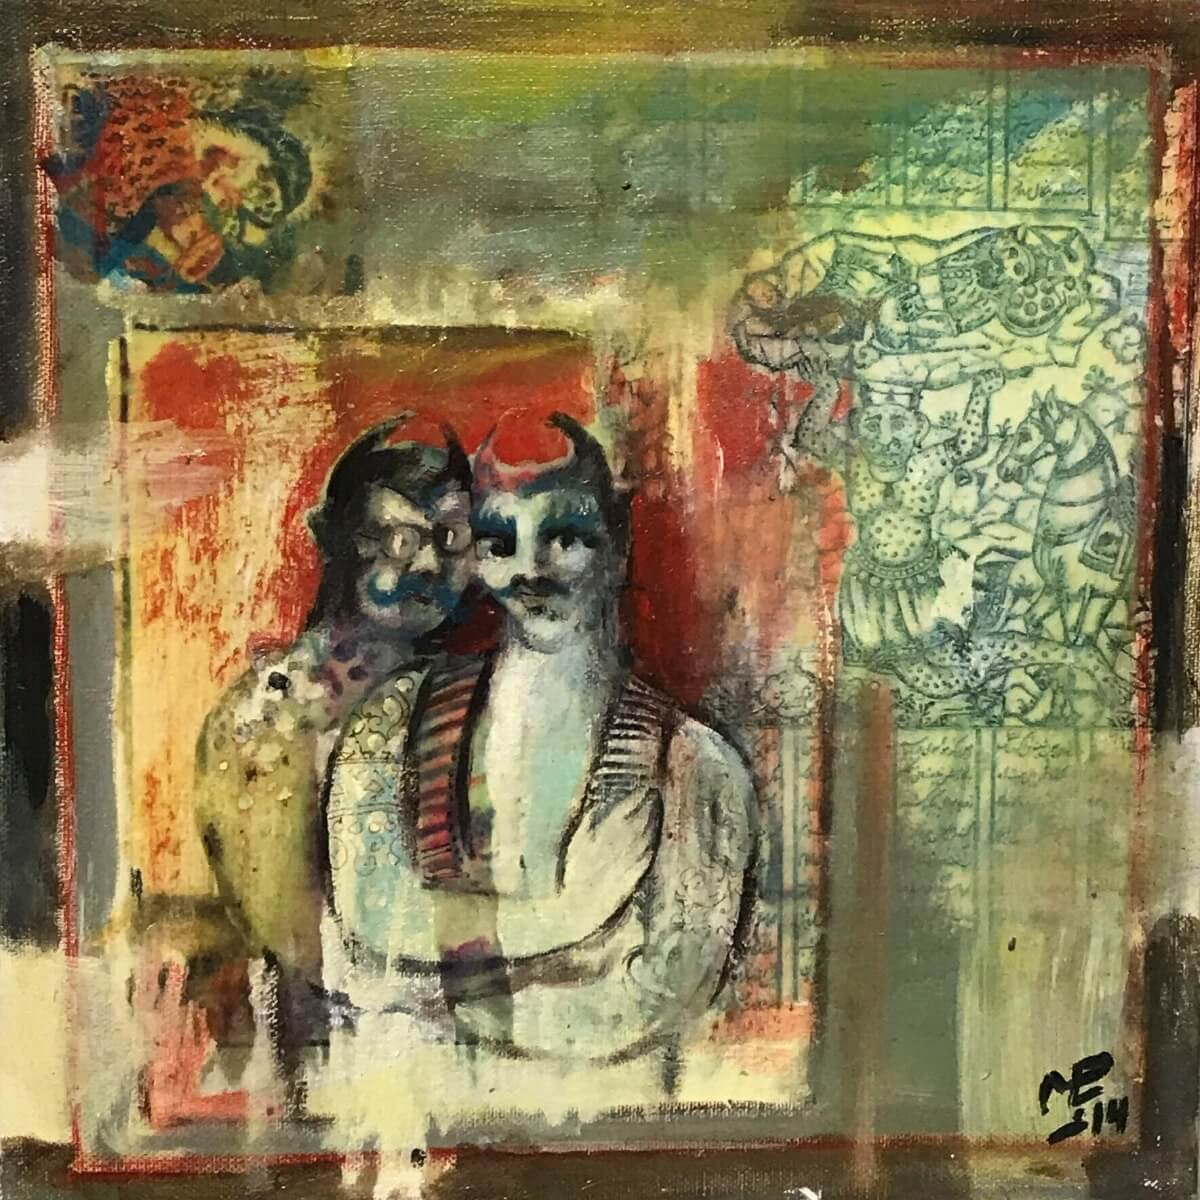 Painting of two men with devils horns embracing